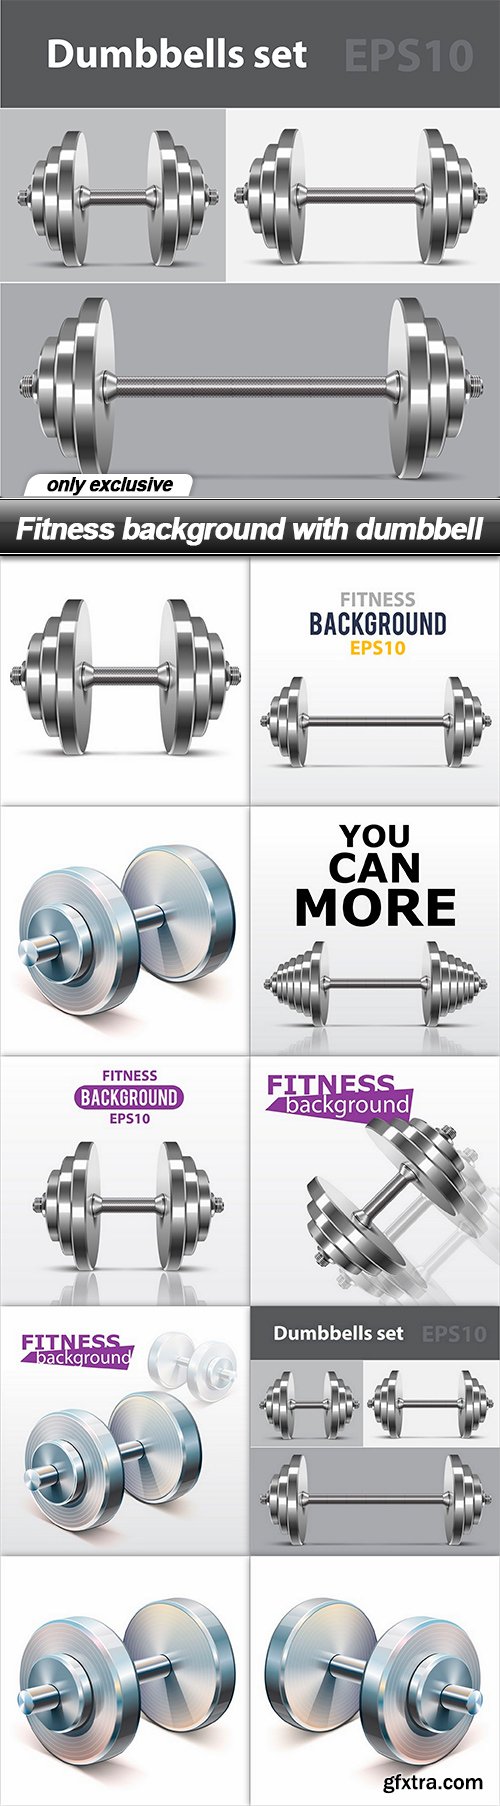 Fitness background with dumbbell - 10 EPS